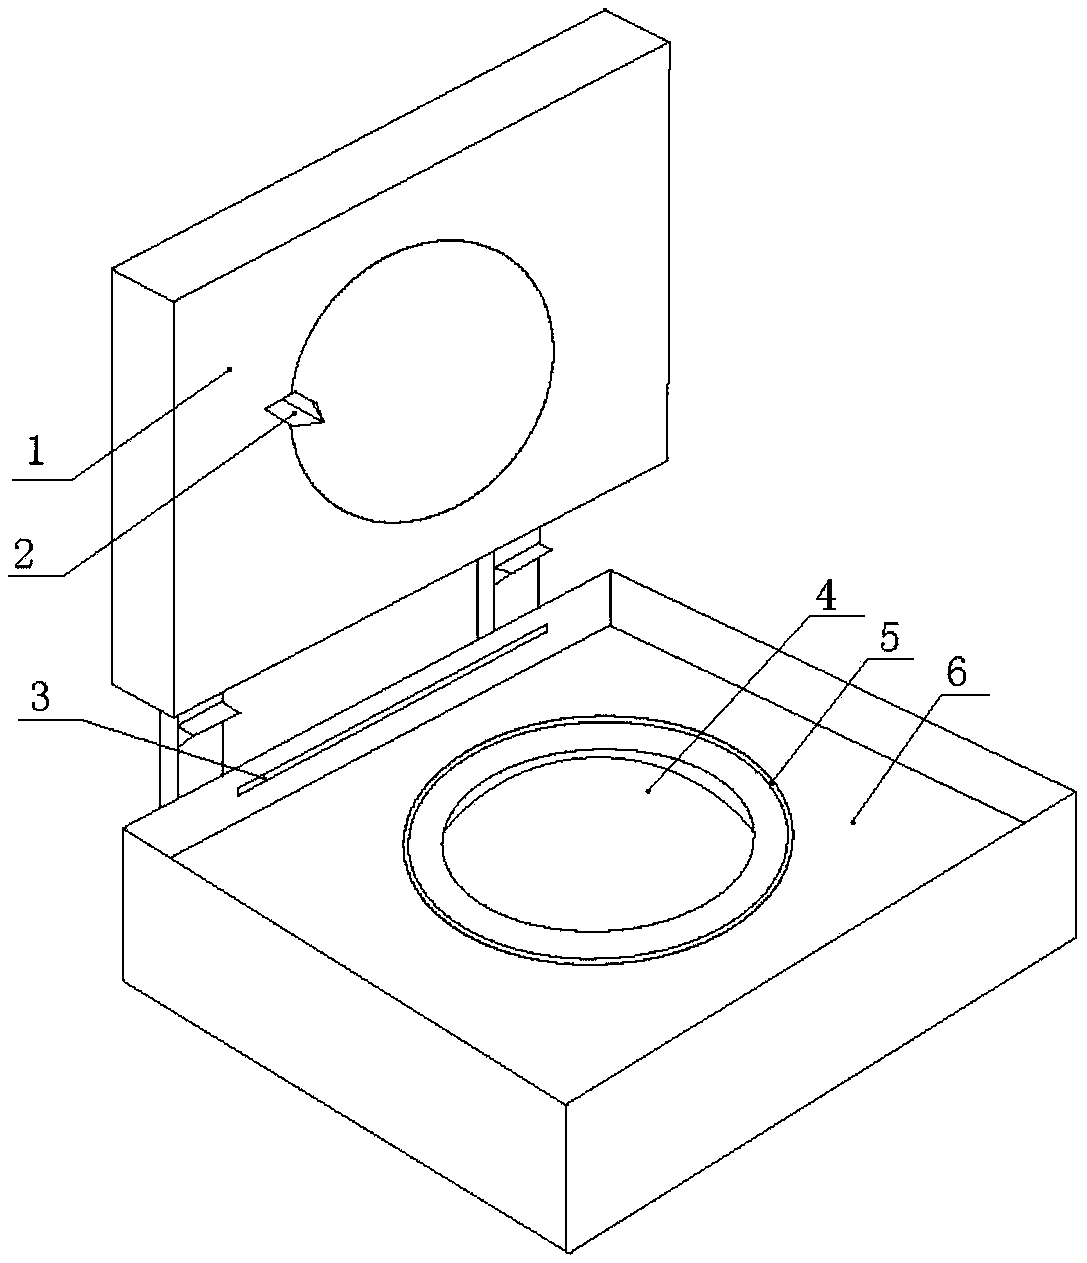 Wafer film covering device